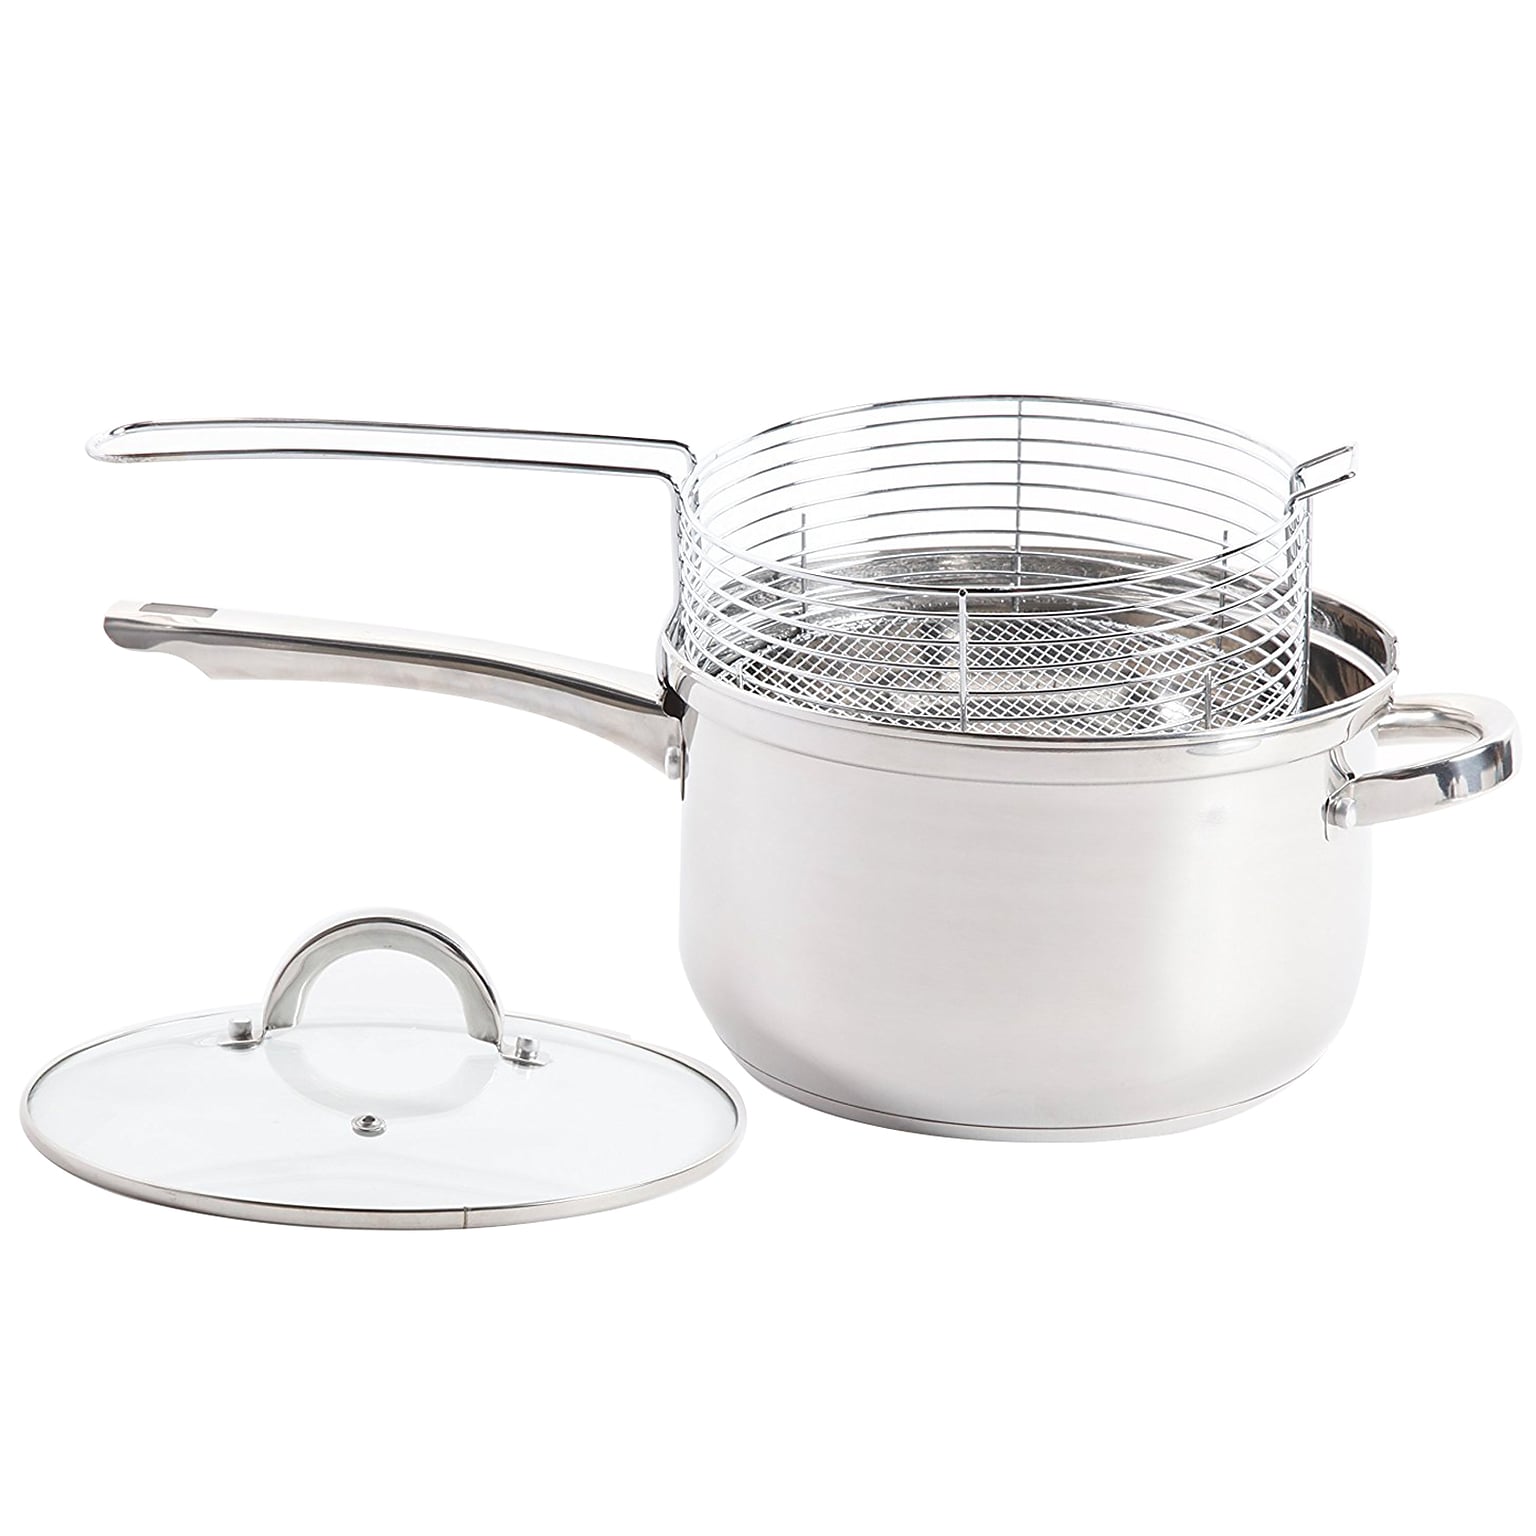 Oster Sangerfield 4.8-Quart Deep Fryer Sauce Pan With Lid and Frying Basket Stainless Steel  (935100933M)